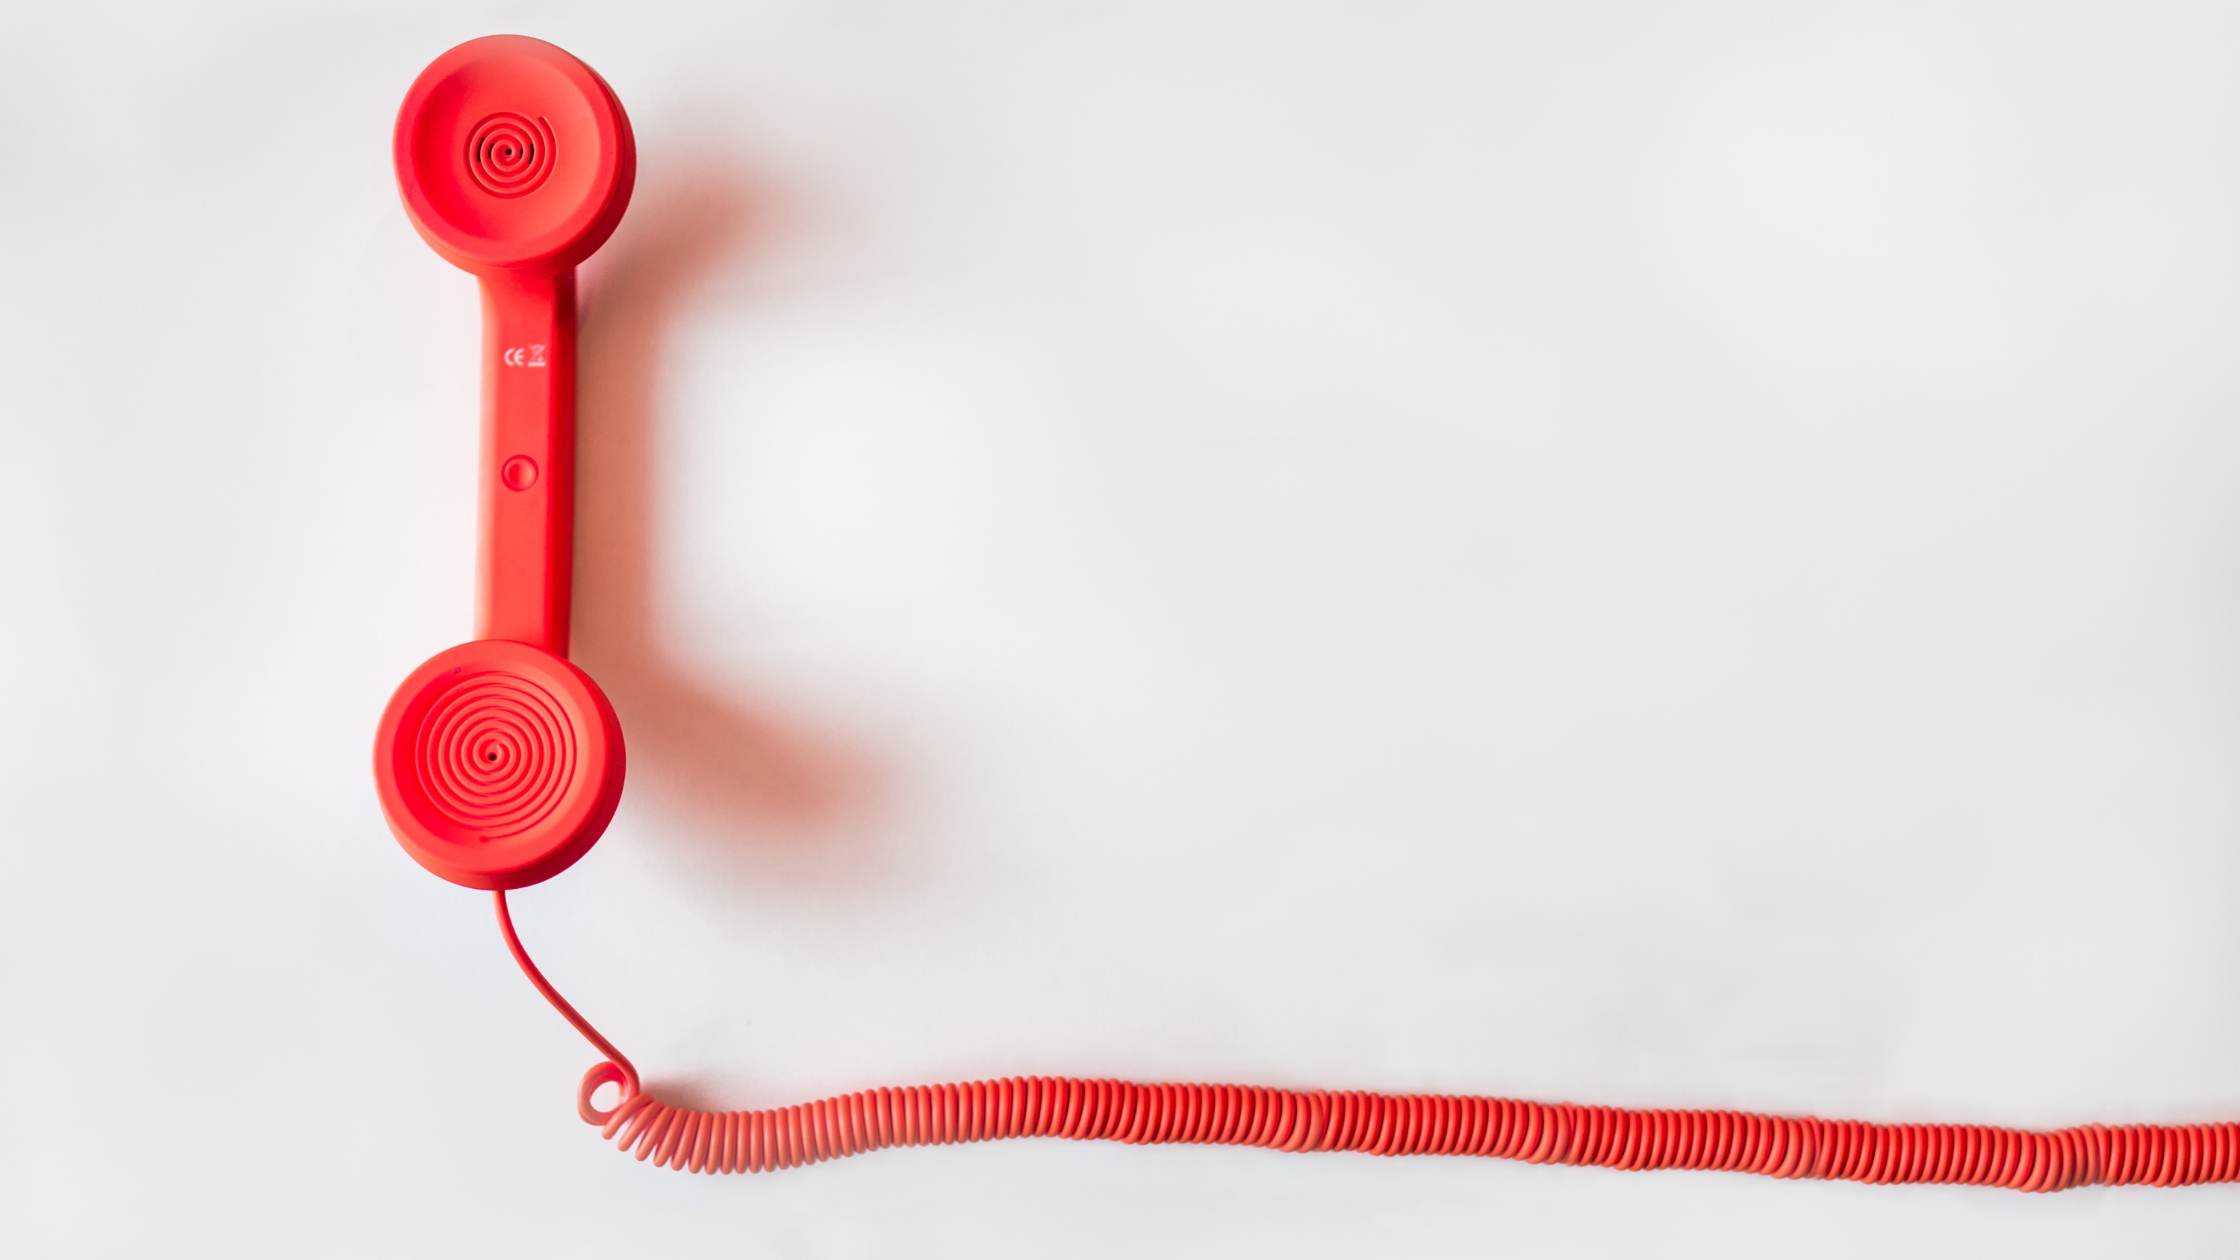 Beyond Phone Call: A red phone on a white background, symbolizing traditional communication methods in debt collection.